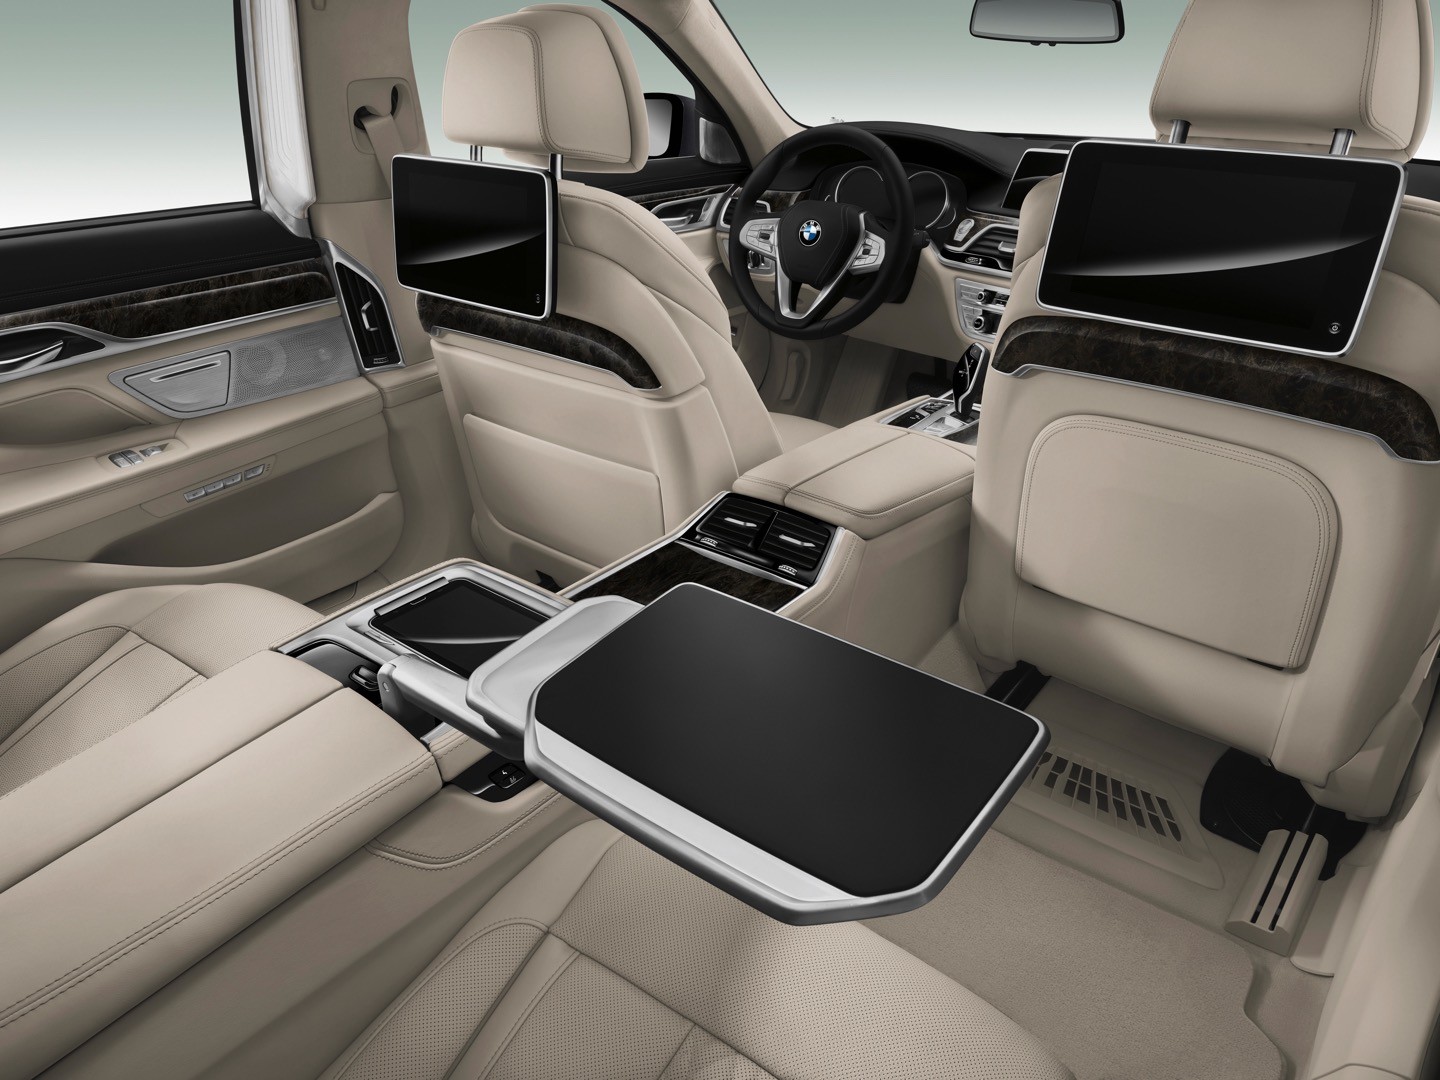 2016-bmw-7-series-finally-officially-unveiled-the-good-stuffs-inside-photo-gallery_119.jpg